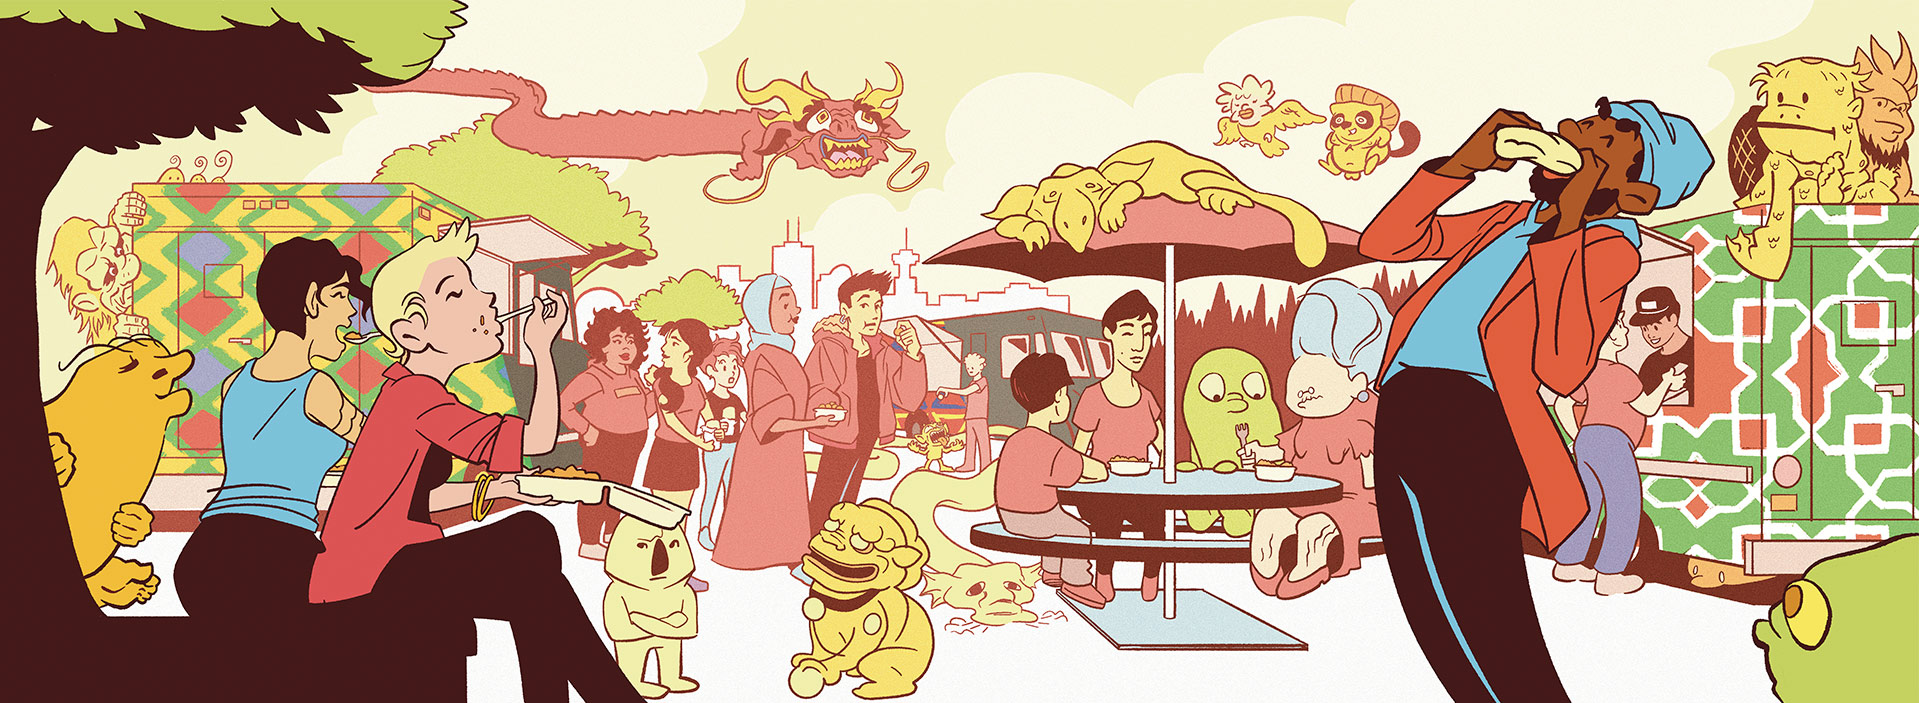 An illustrative mural featuring a diverse cast of Vancouverites enjoying food from The Potluck Truck, a food truck brand curated by refugees. Amongst them are mythological creatures from various cultures.